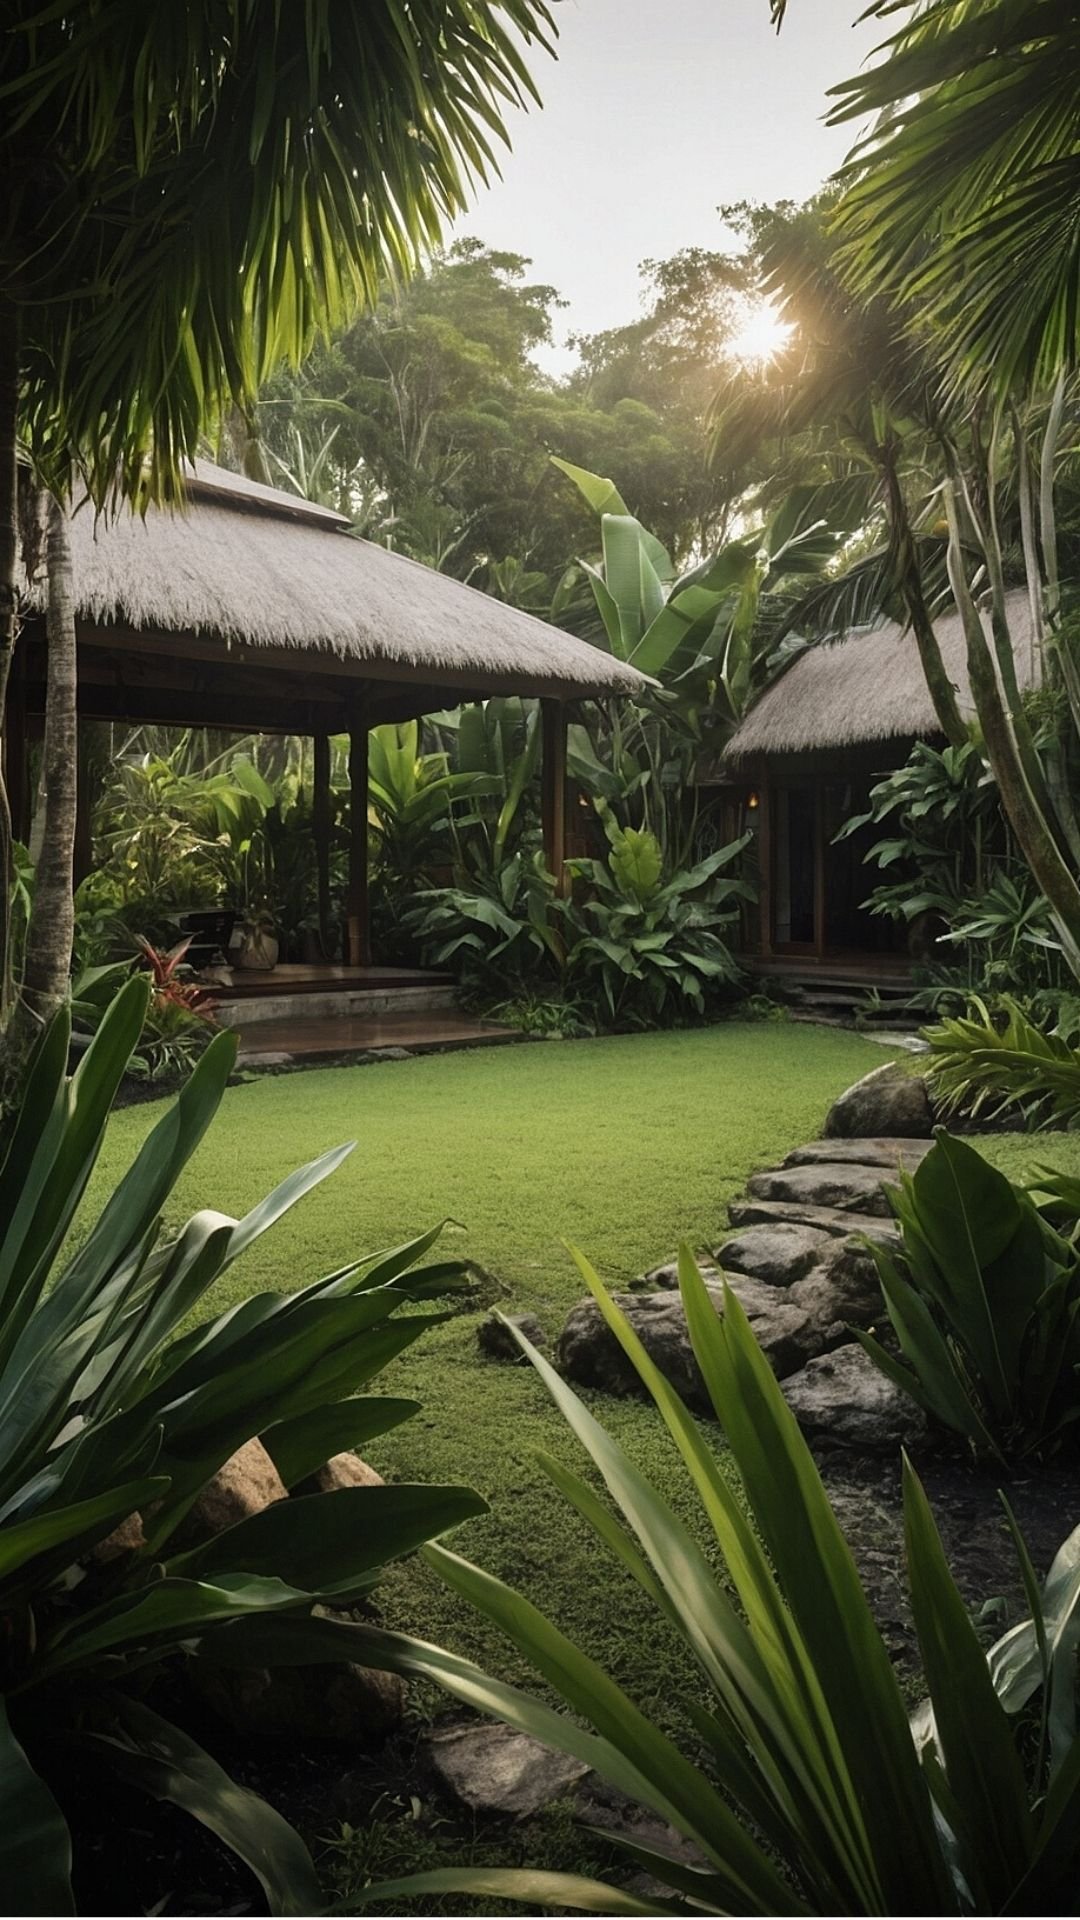 Hideaway Haven: Thatched Roof Tropical Gazebo Amidst Lush Greenery